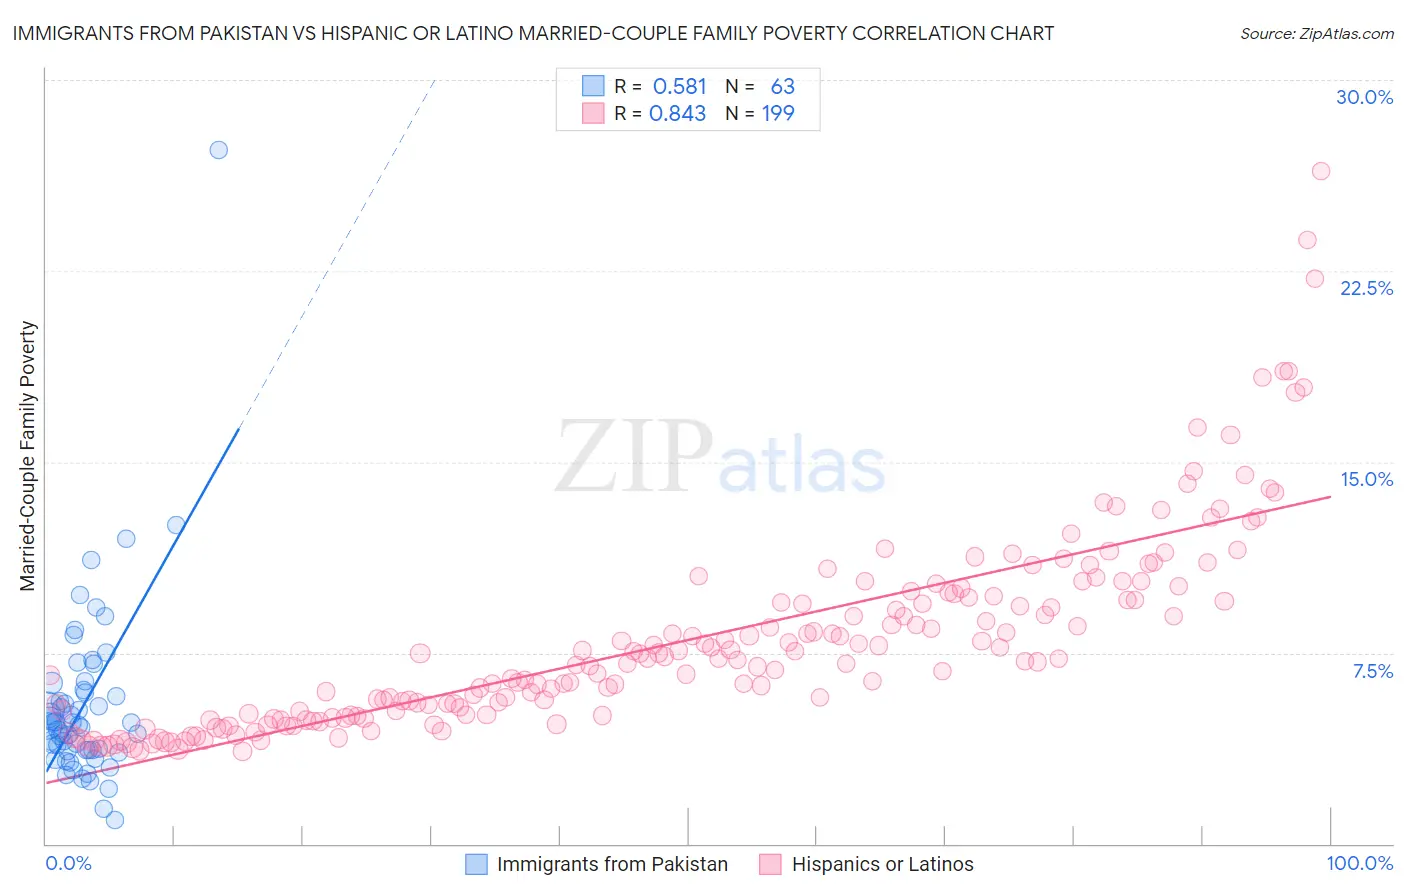 Immigrants from Pakistan vs Hispanic or Latino Married-Couple Family Poverty